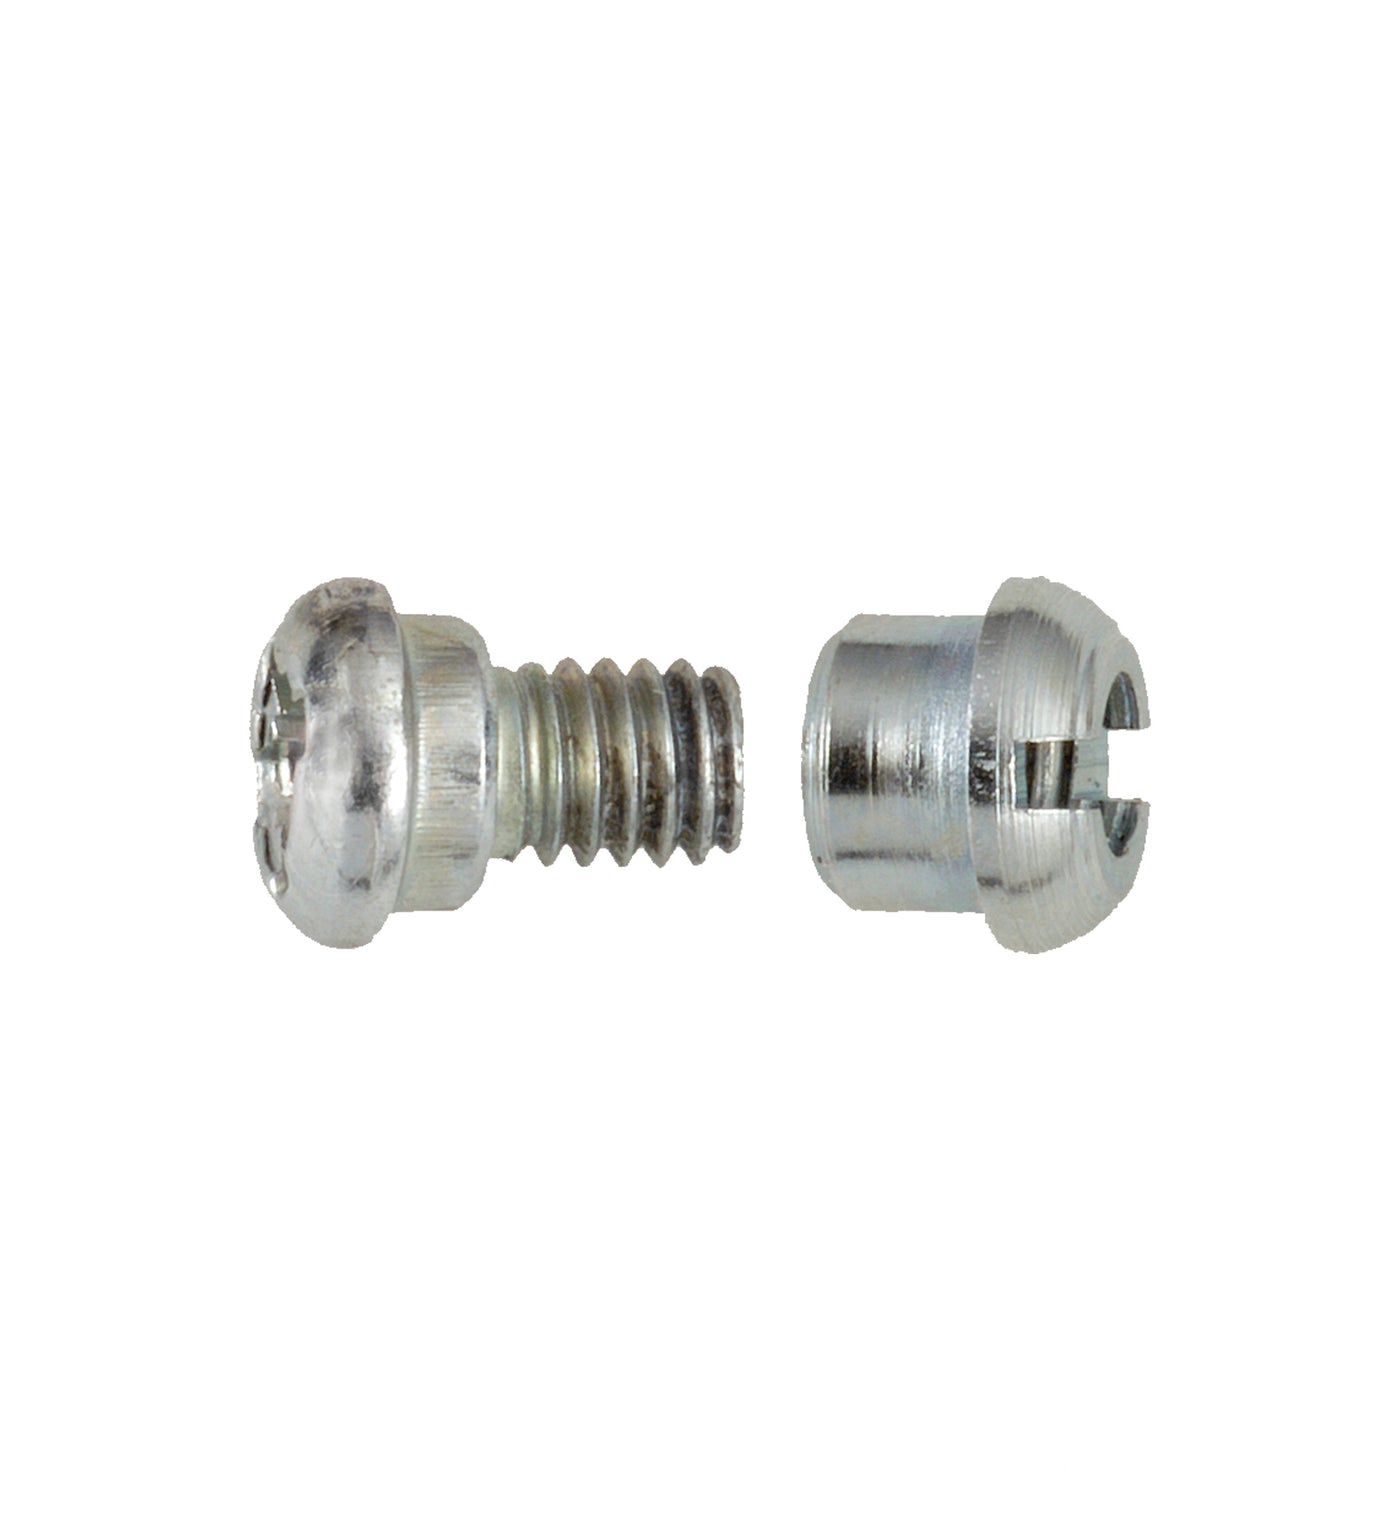 Anvil Screw Set for LO 5105, 1105, 5504 Industrial Cutters